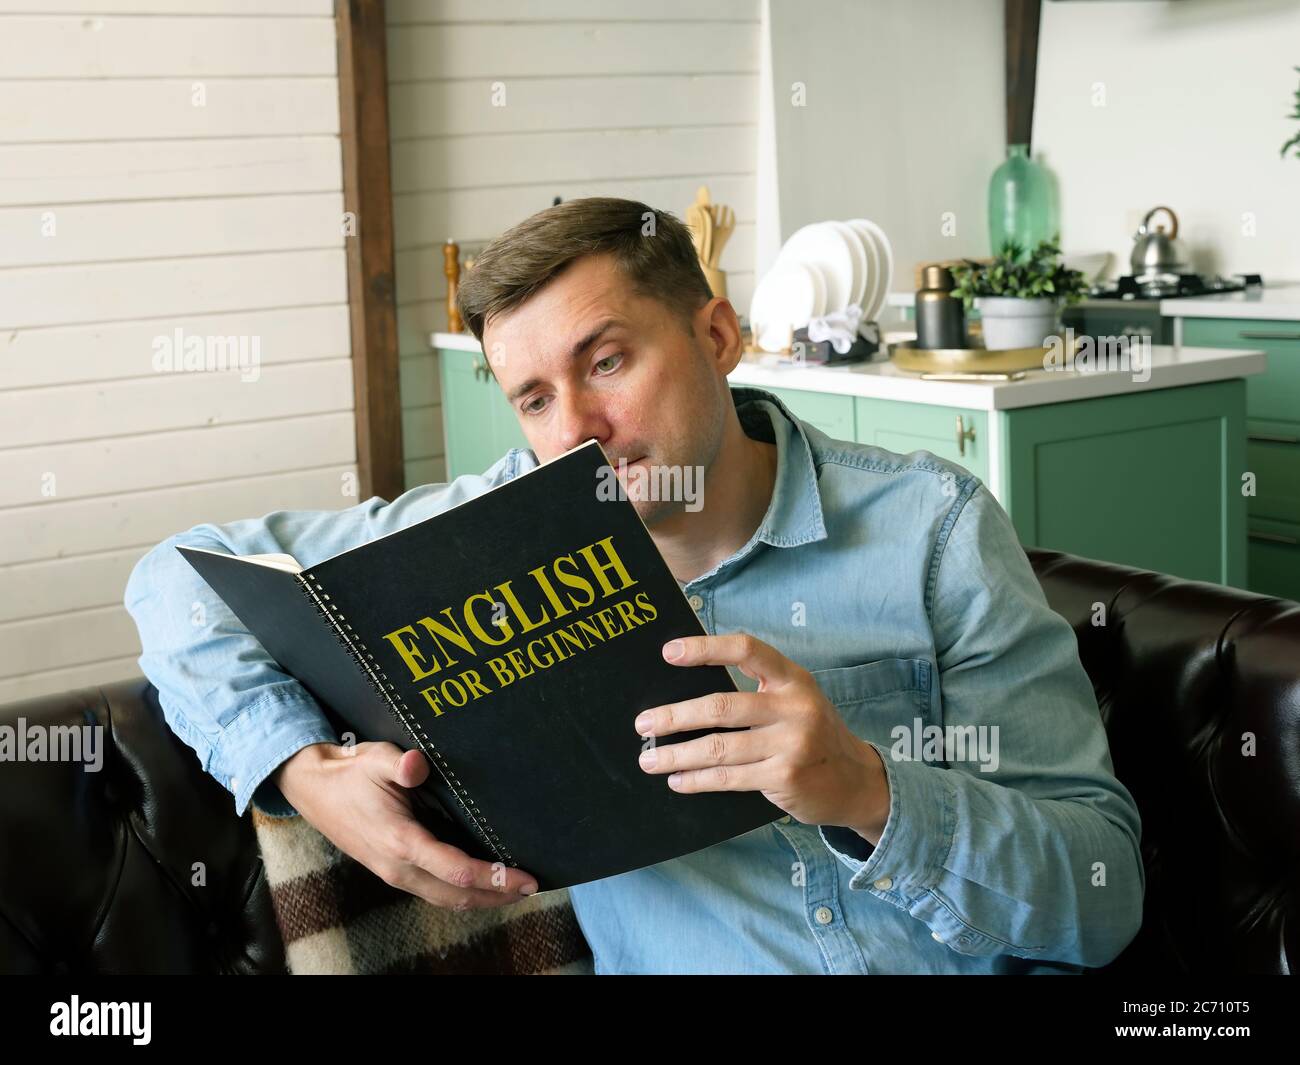 Man learning with English for beginners book. Stock Photo